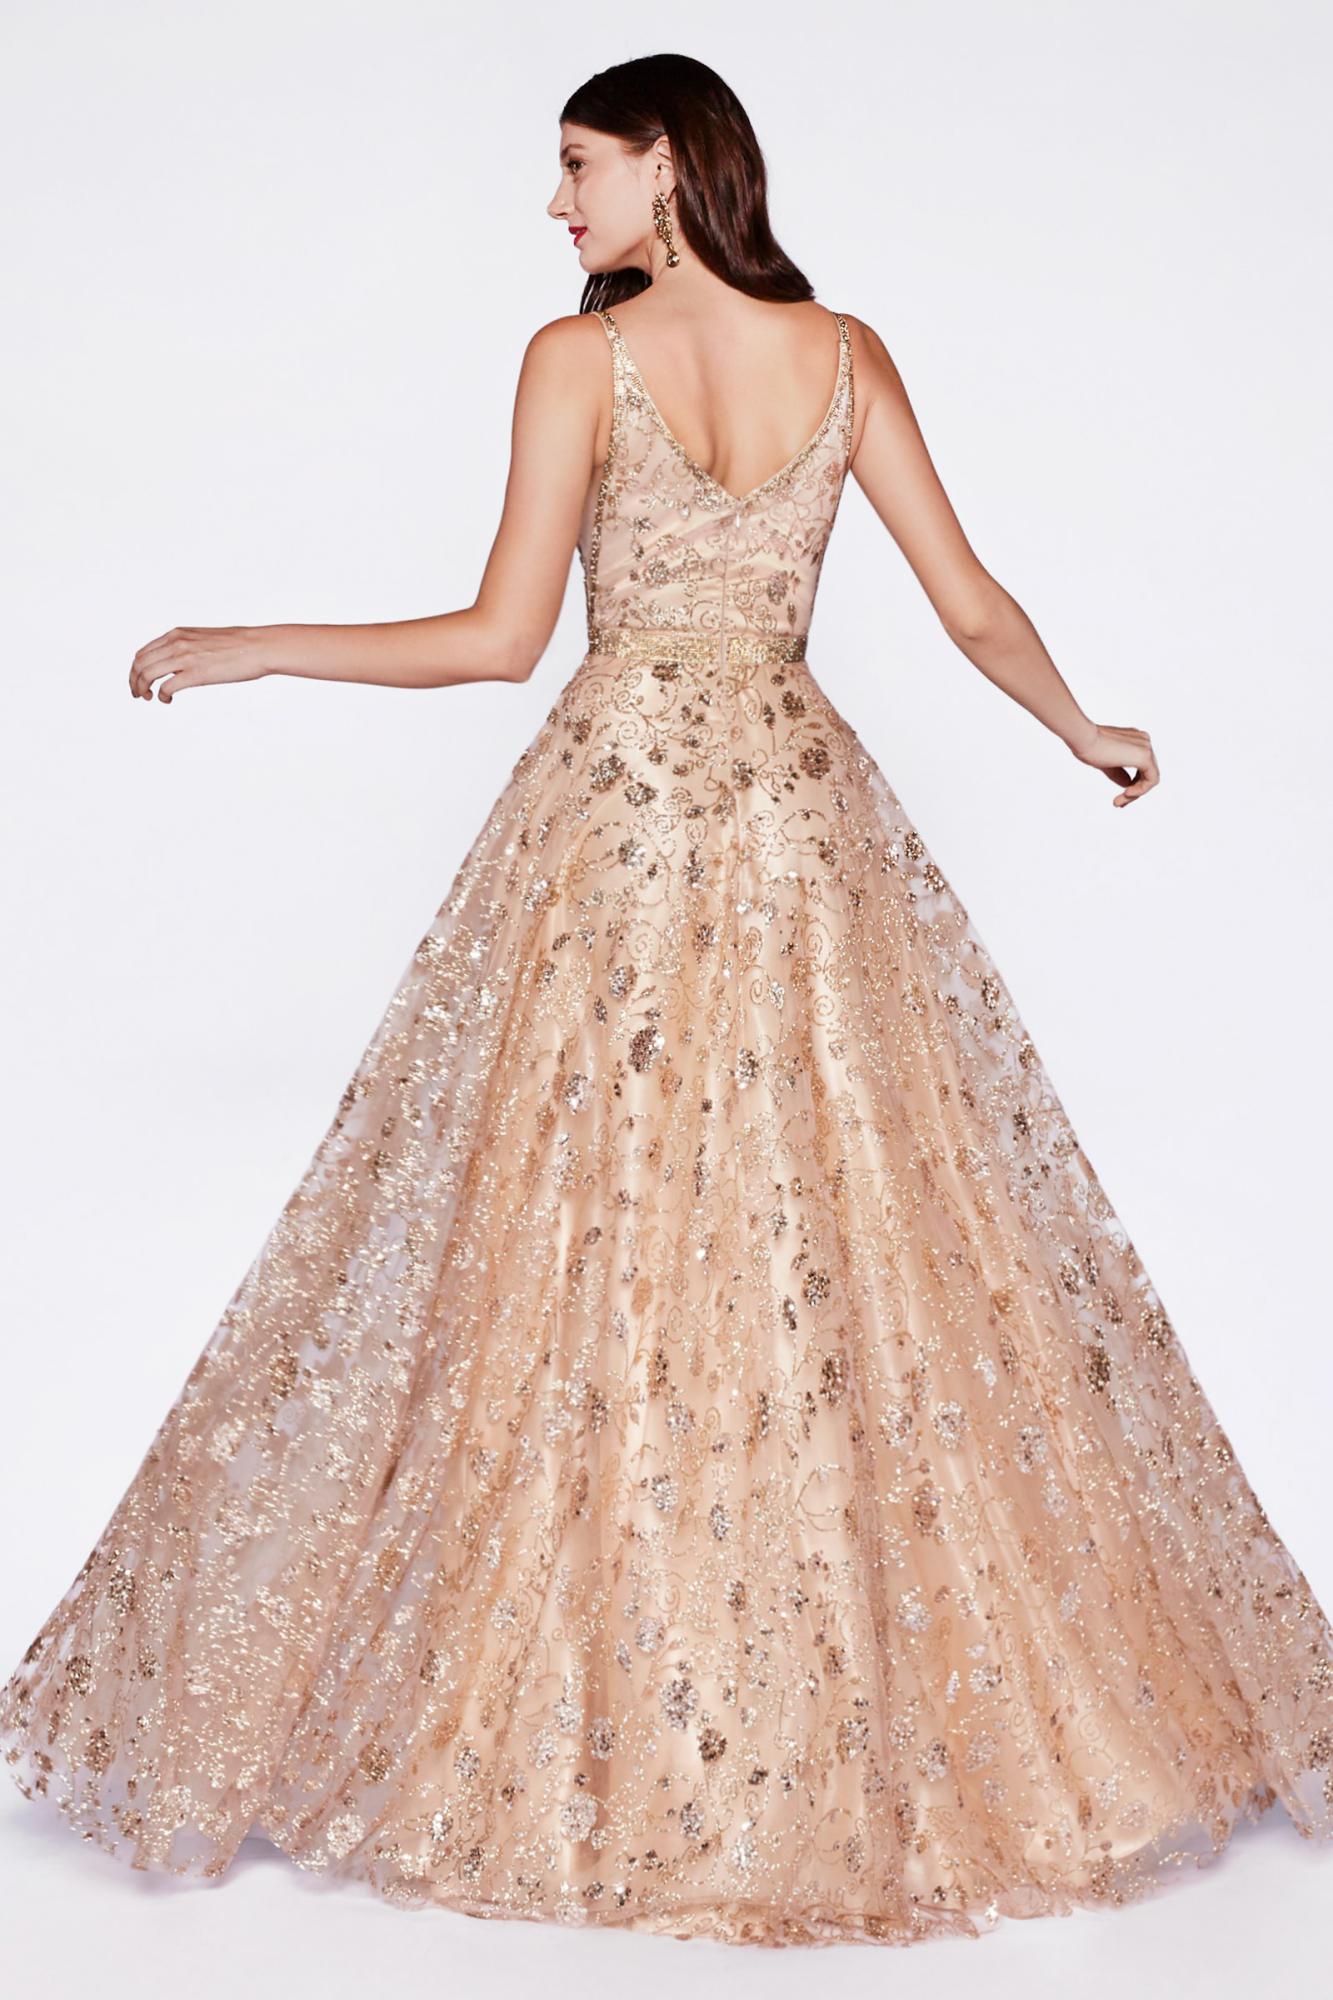 A-line floral glitter print gown with beaded edging and belt_Gold nude